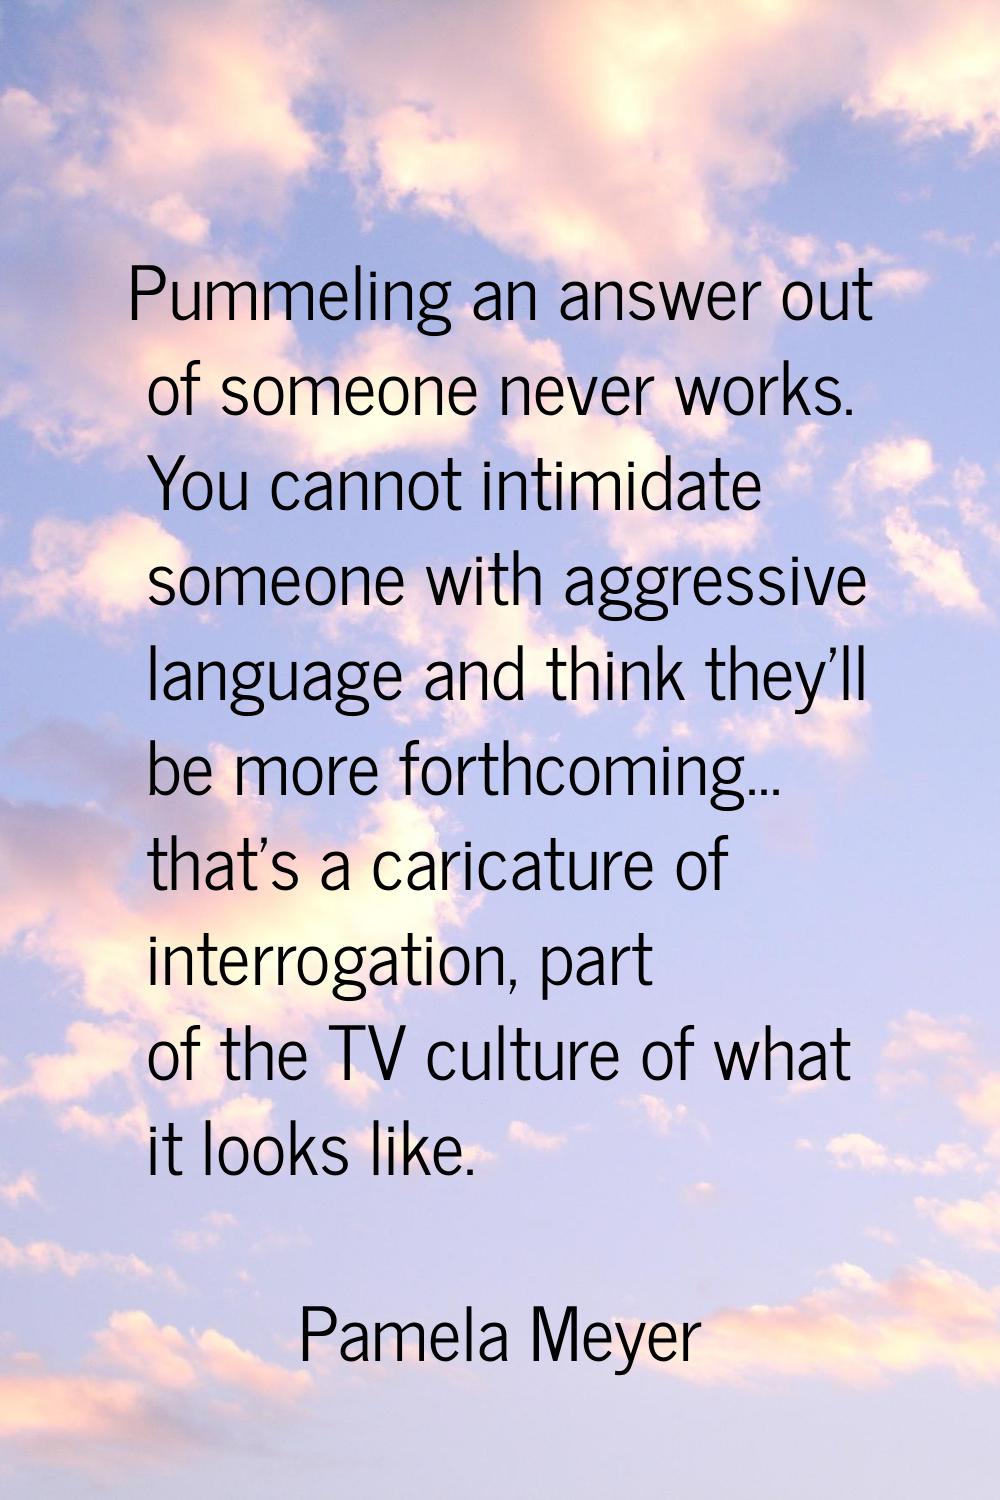 Pummeling an answer out of someone never works. You cannot intimidate someone with aggressive langu